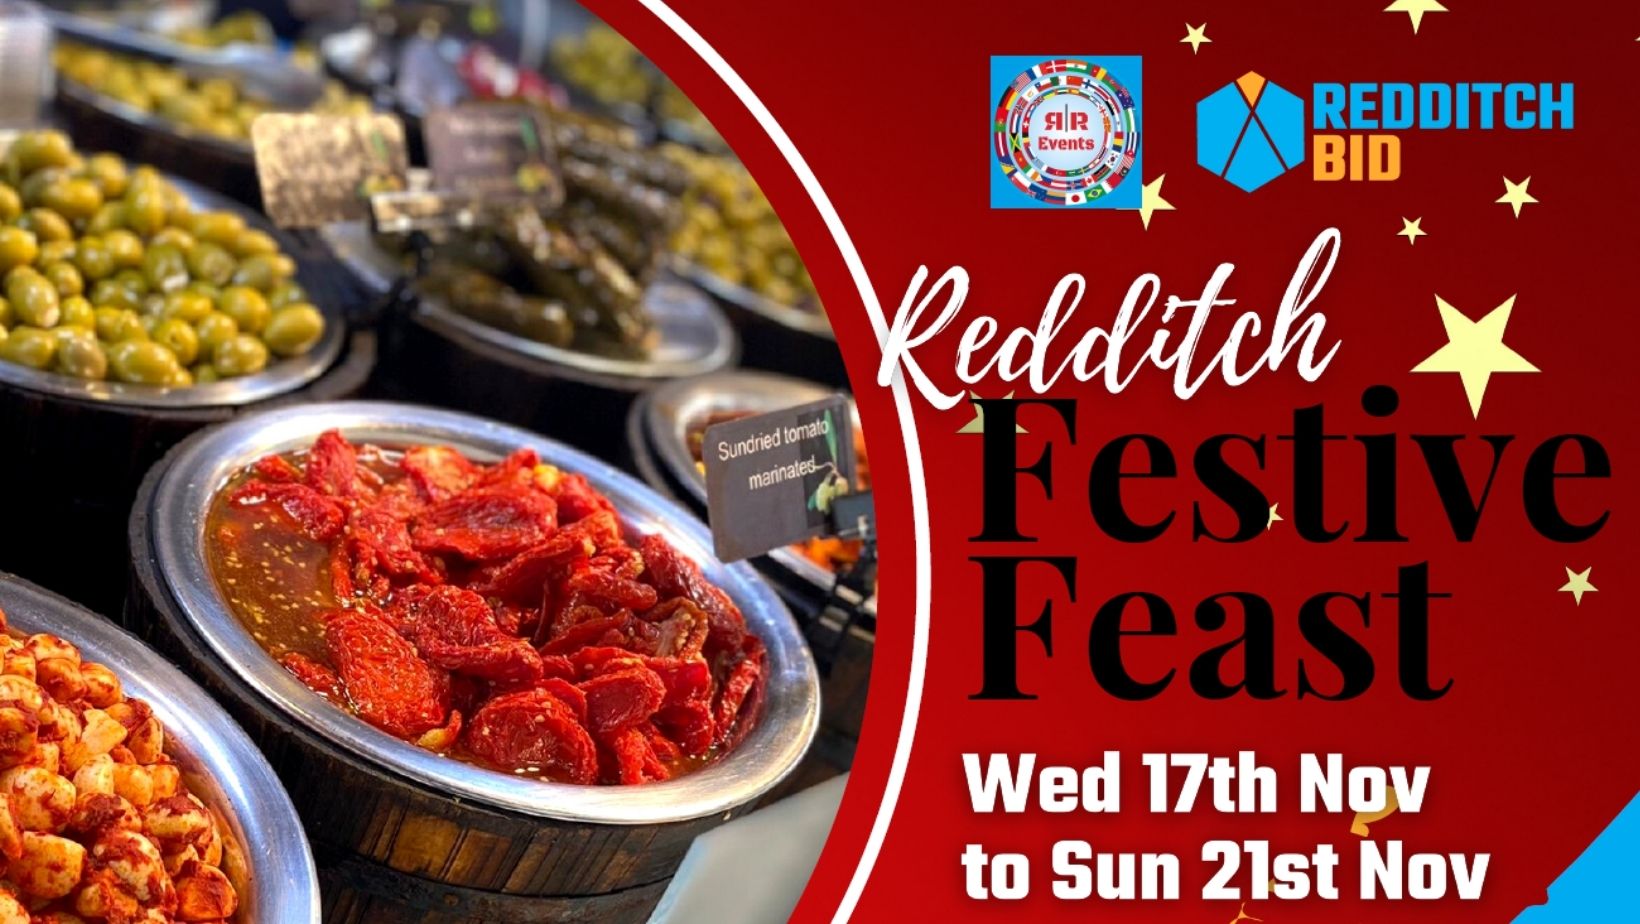 Join us for the Redditch Festive Feast in November